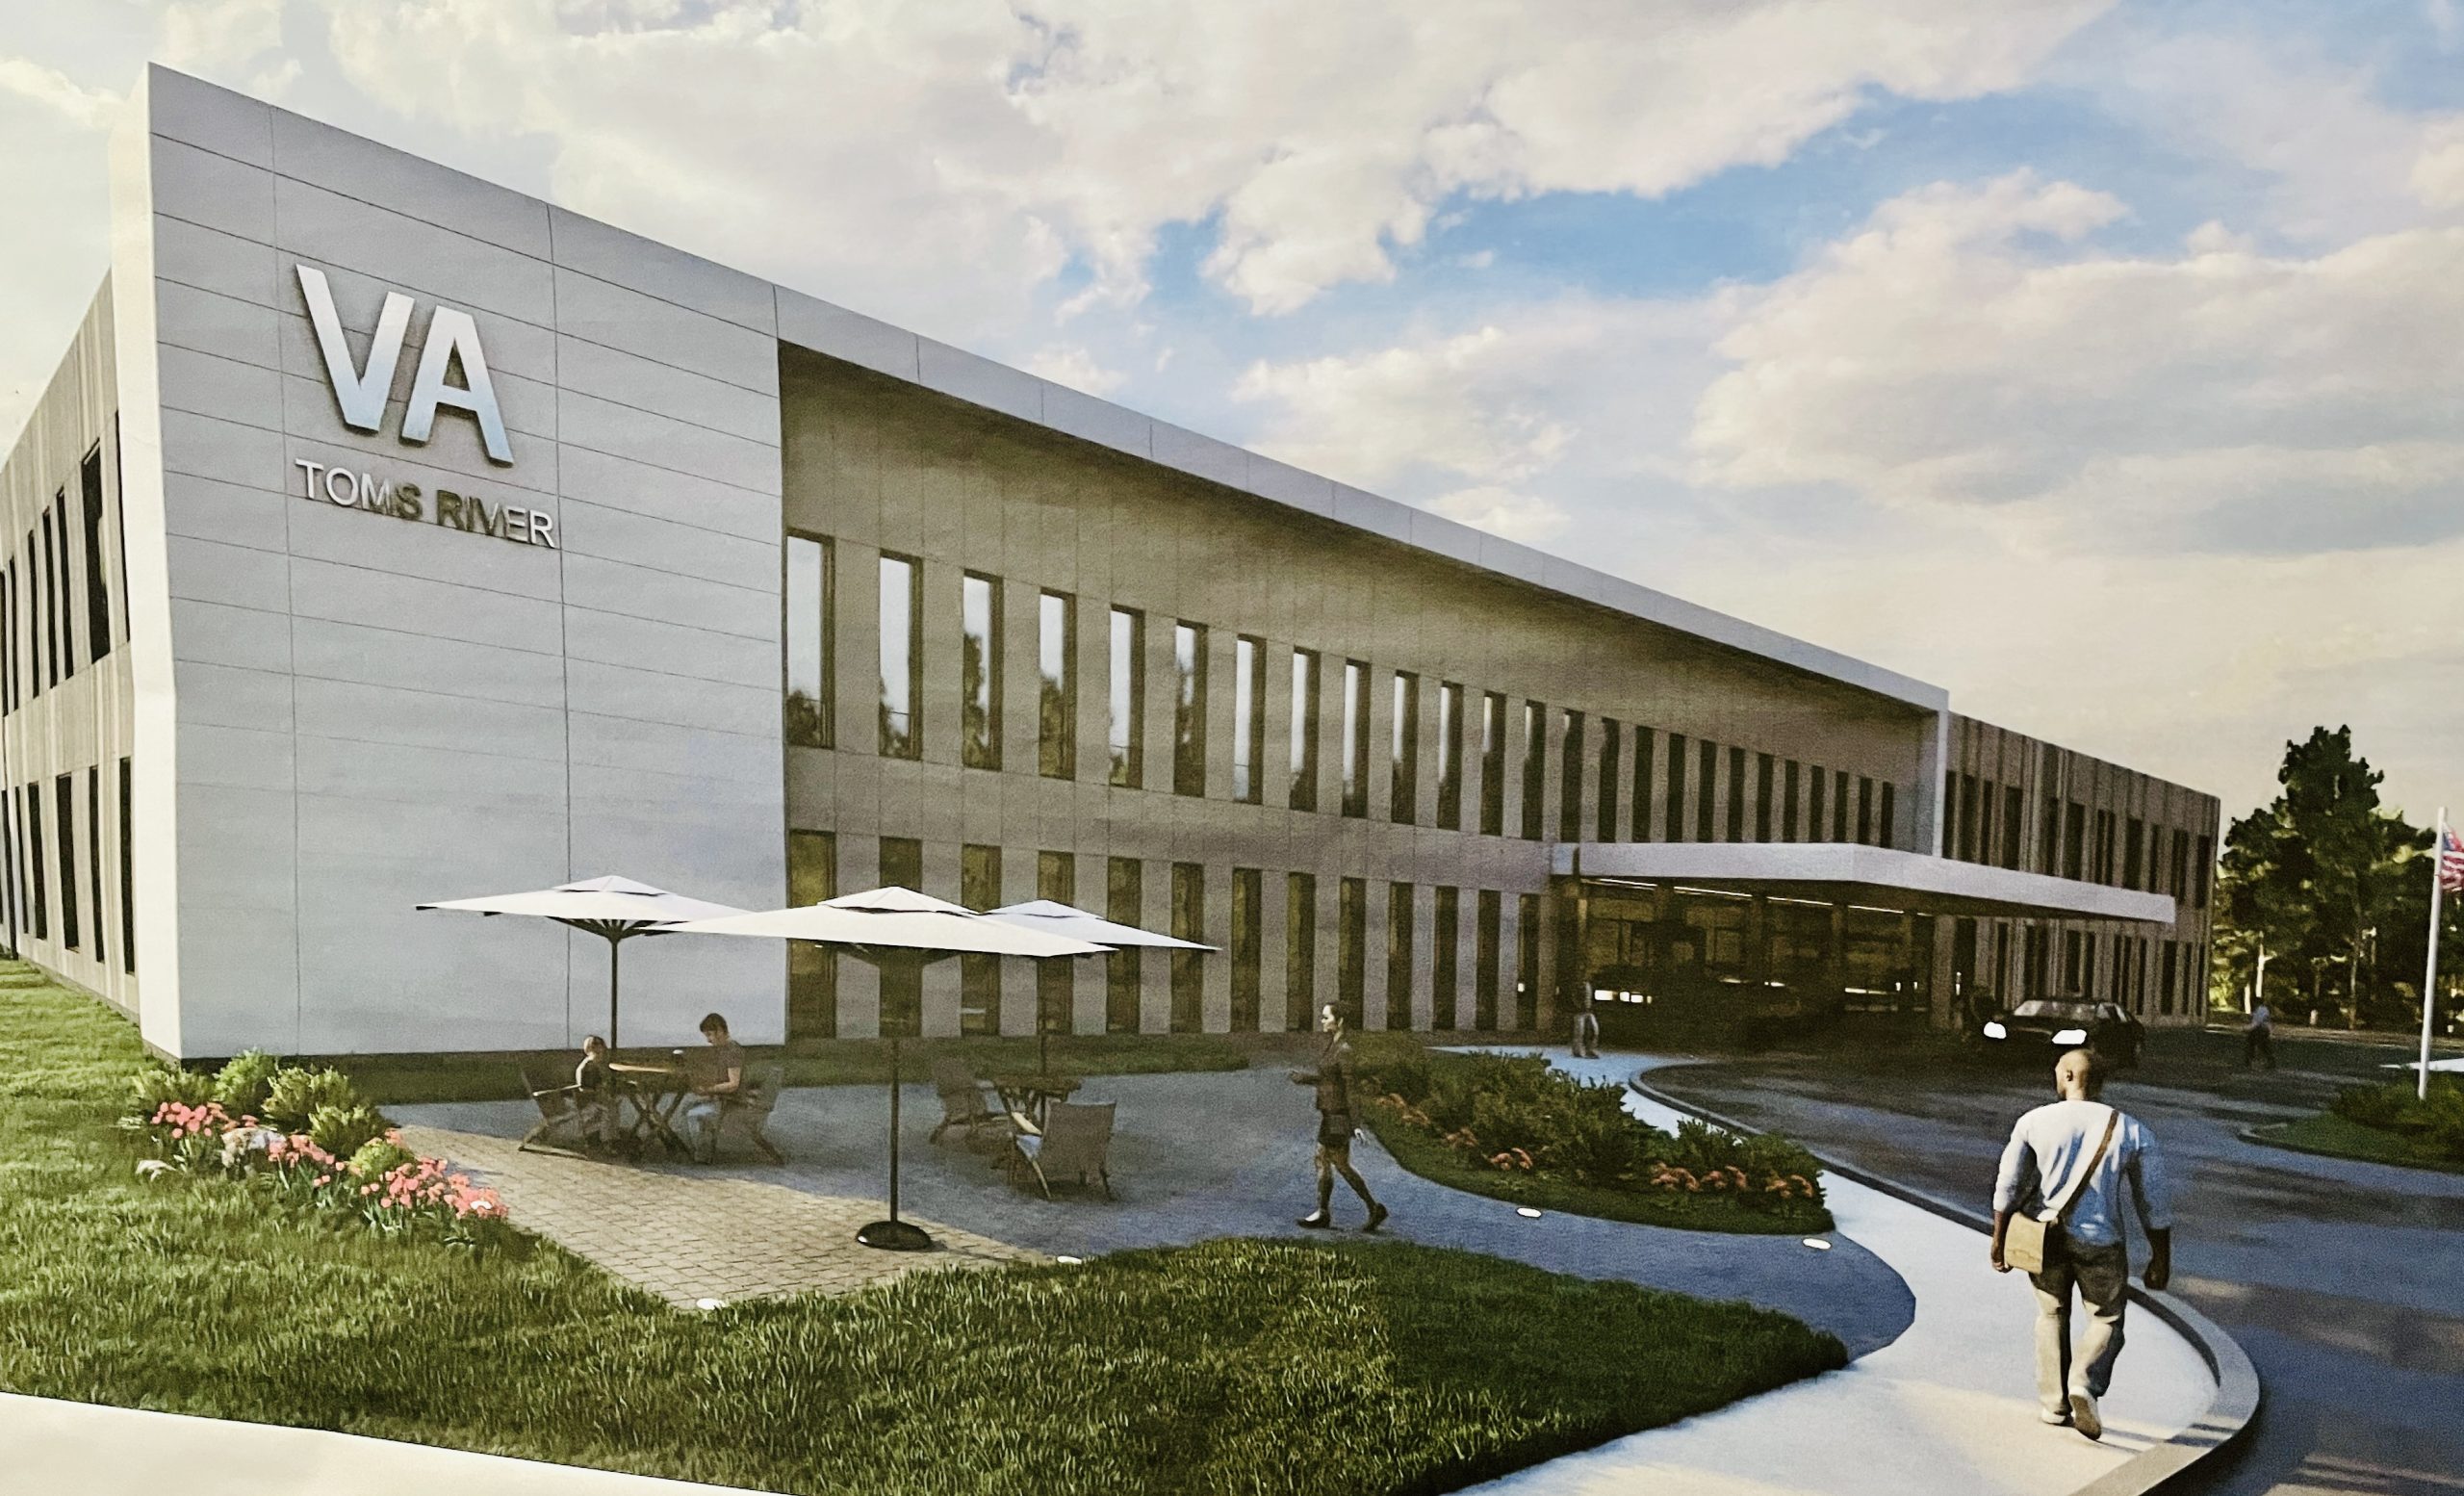 A rendering of the planned VA Outpatient Clinic in Toms River. (Photo: Daniel Nee)